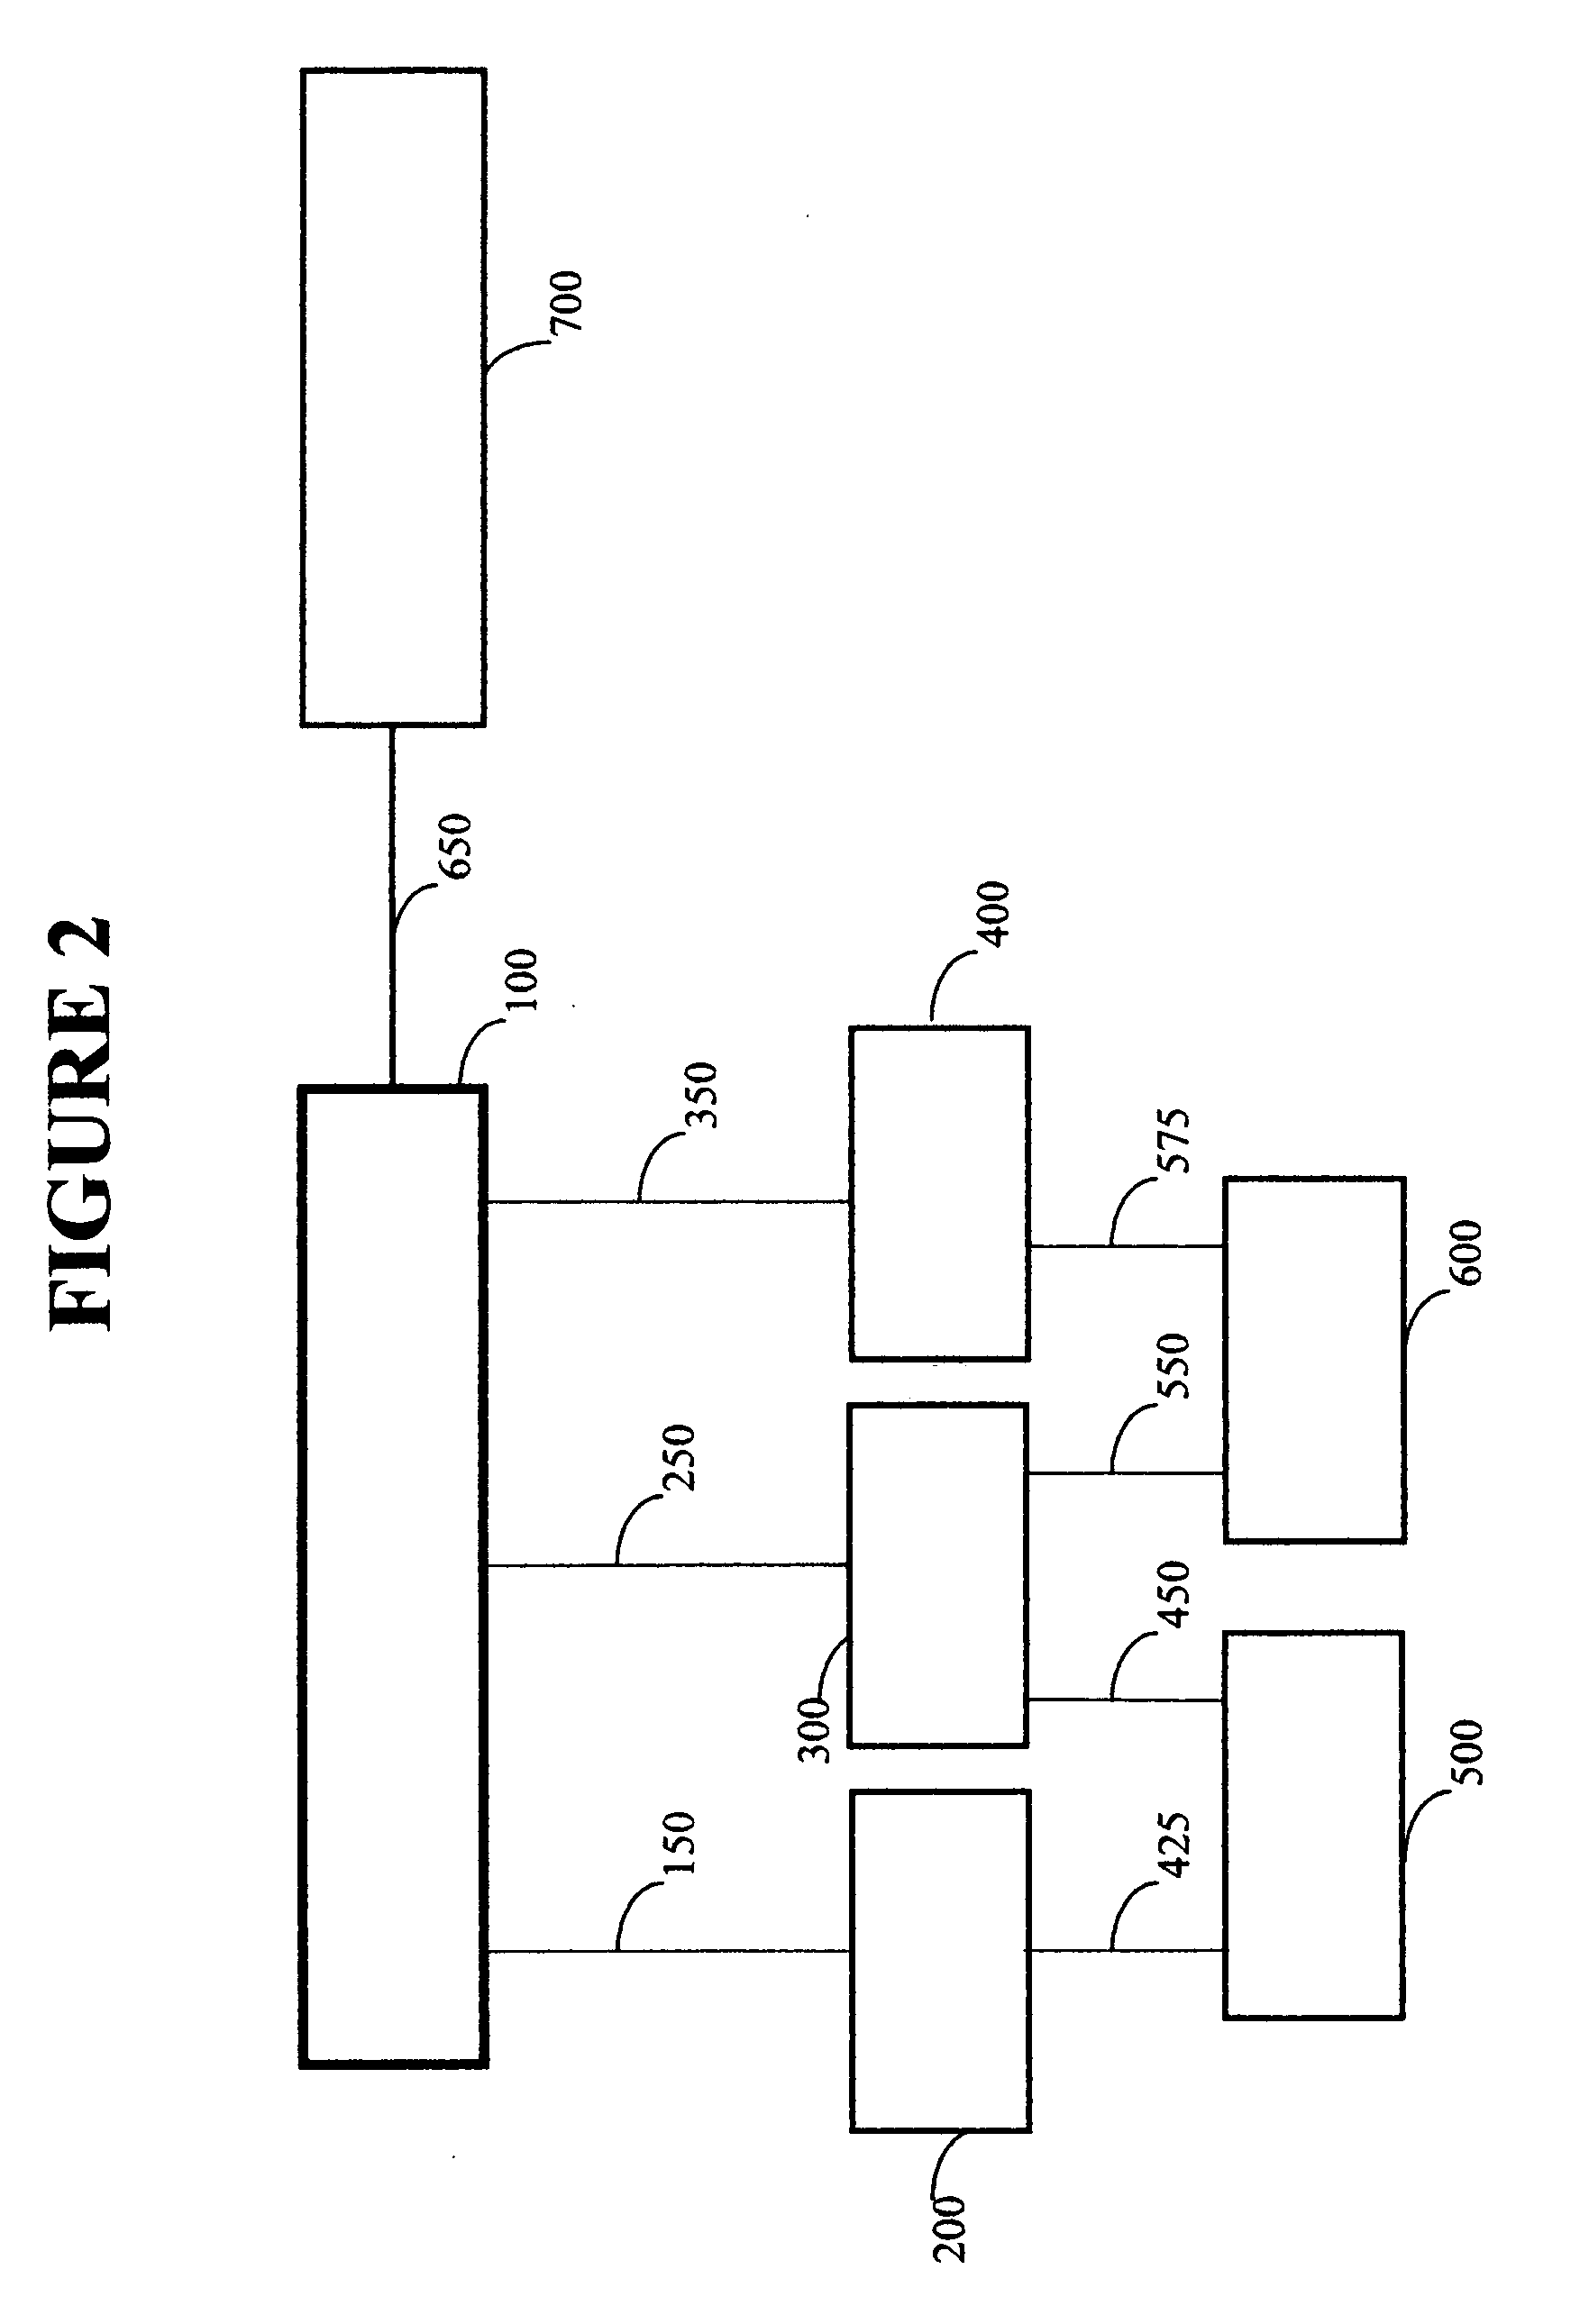 System, method and software for creating or maintaining local or distributed mapping and transparent persistence of complex data objects and their data relationships